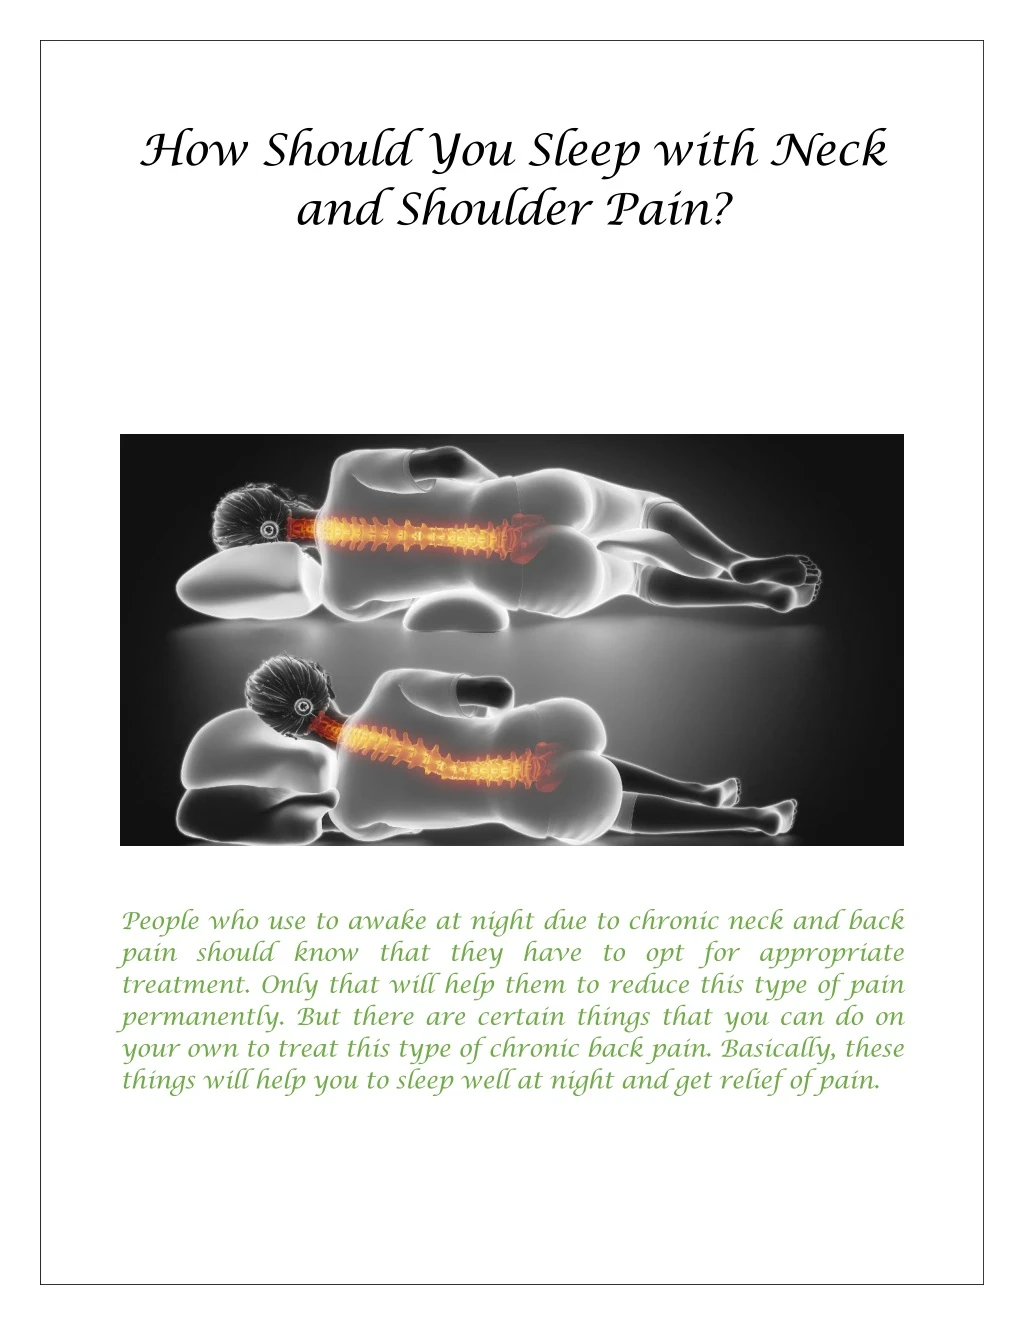 how should you sleep with neck and shoulder pain